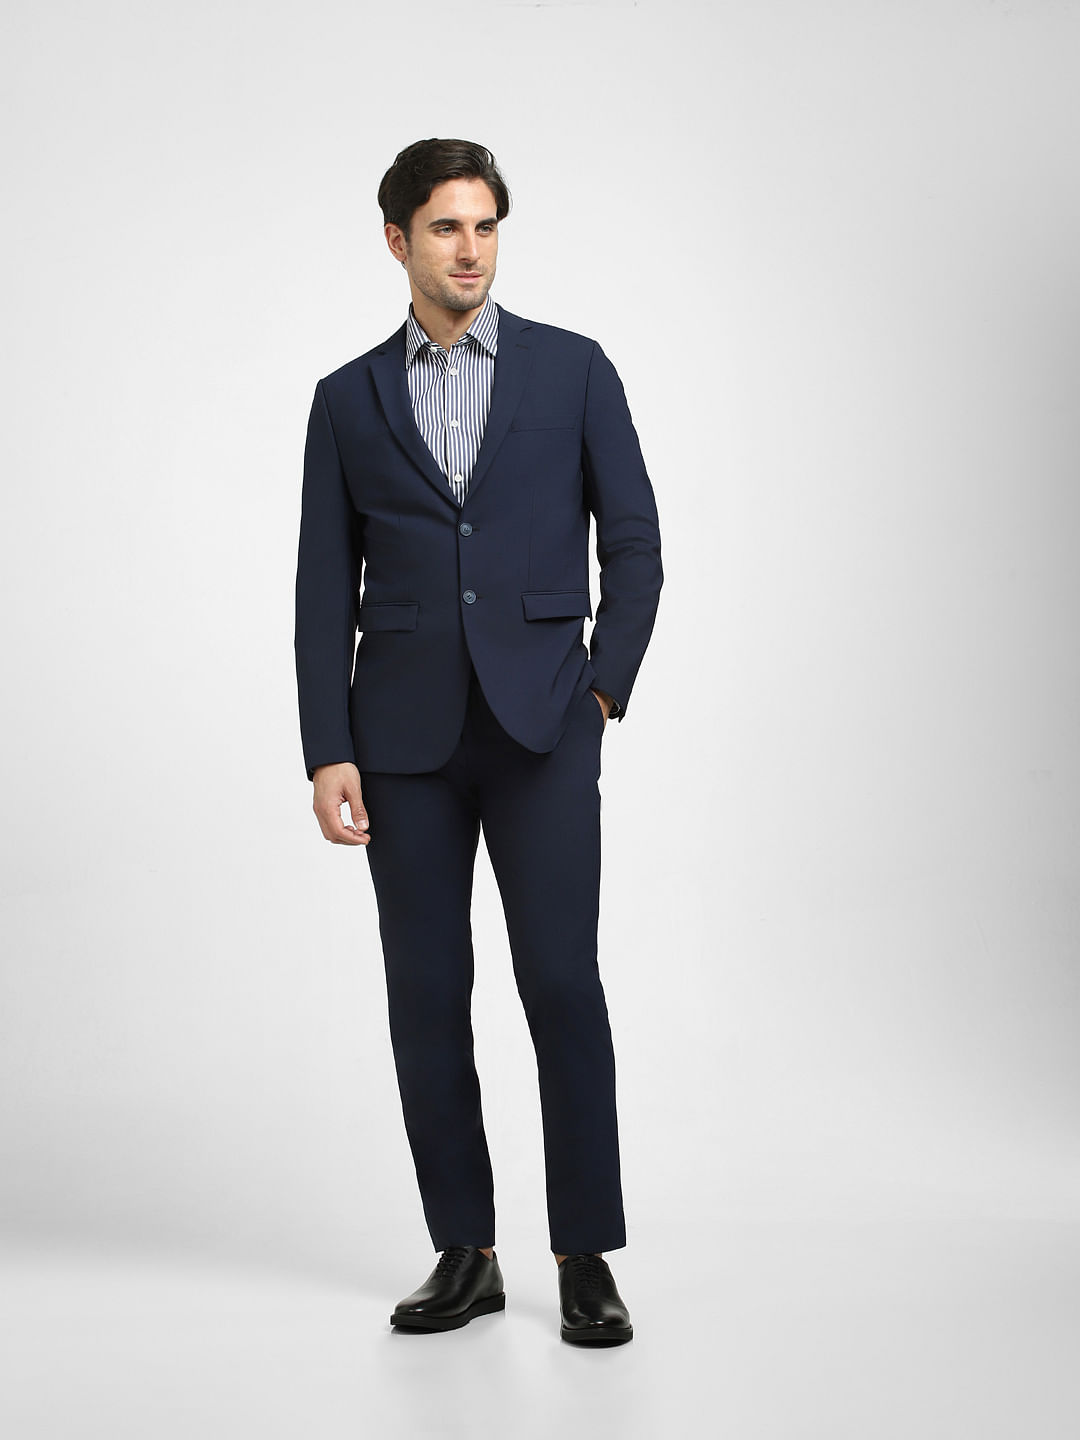 Contemporary Women's Two Button Jacket/Straight Leg Trouser Suit,  Contemporary Blue - SHOP ALL WORKWEAR from Simon Jersey UK